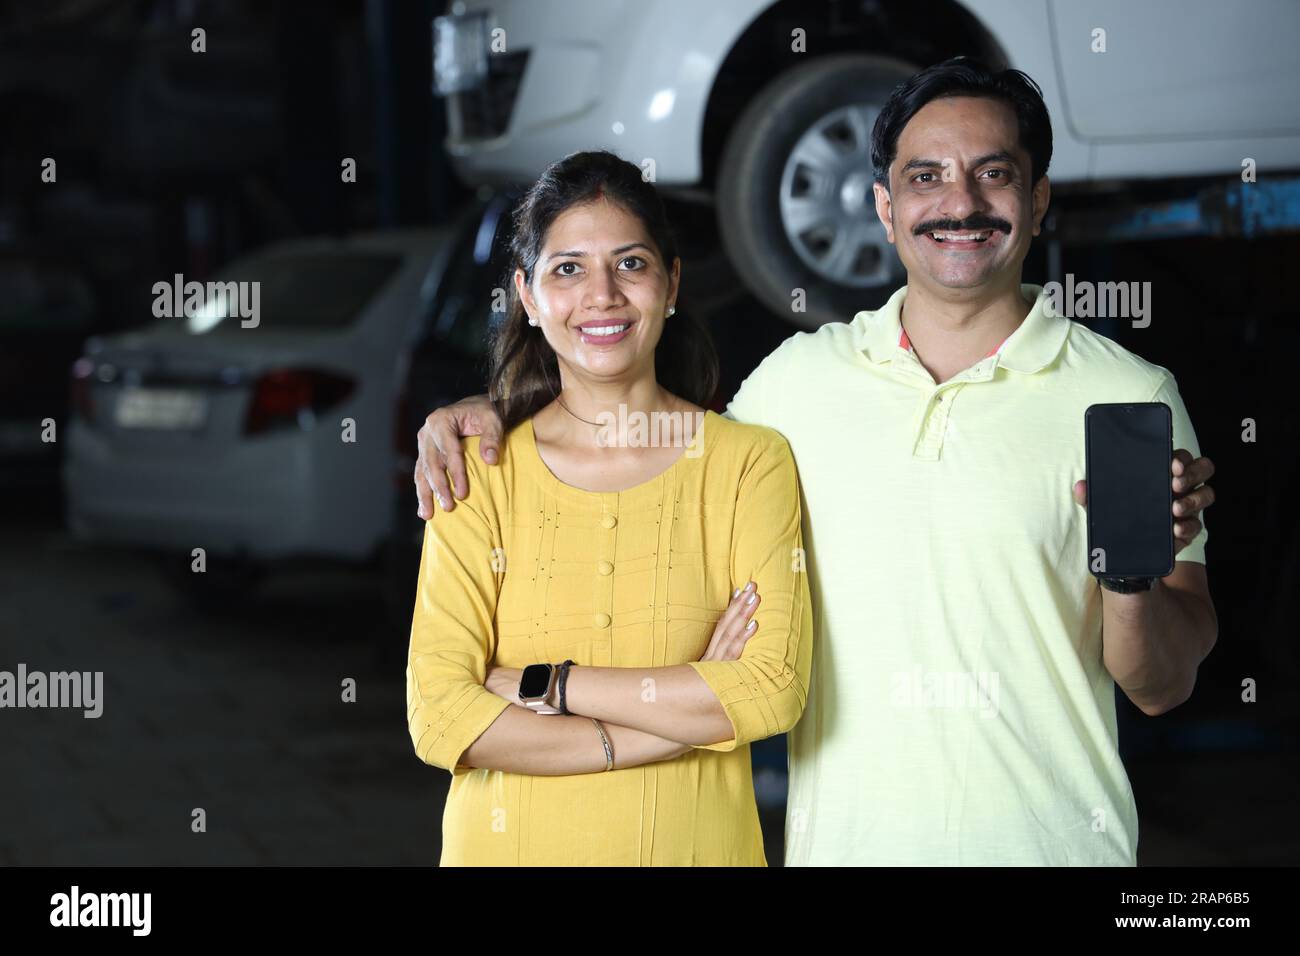 Indian happy customers showing thumbs up for repairing the car with honesty. Portraying customer trust and satisfaction towards the service station Stock Photo